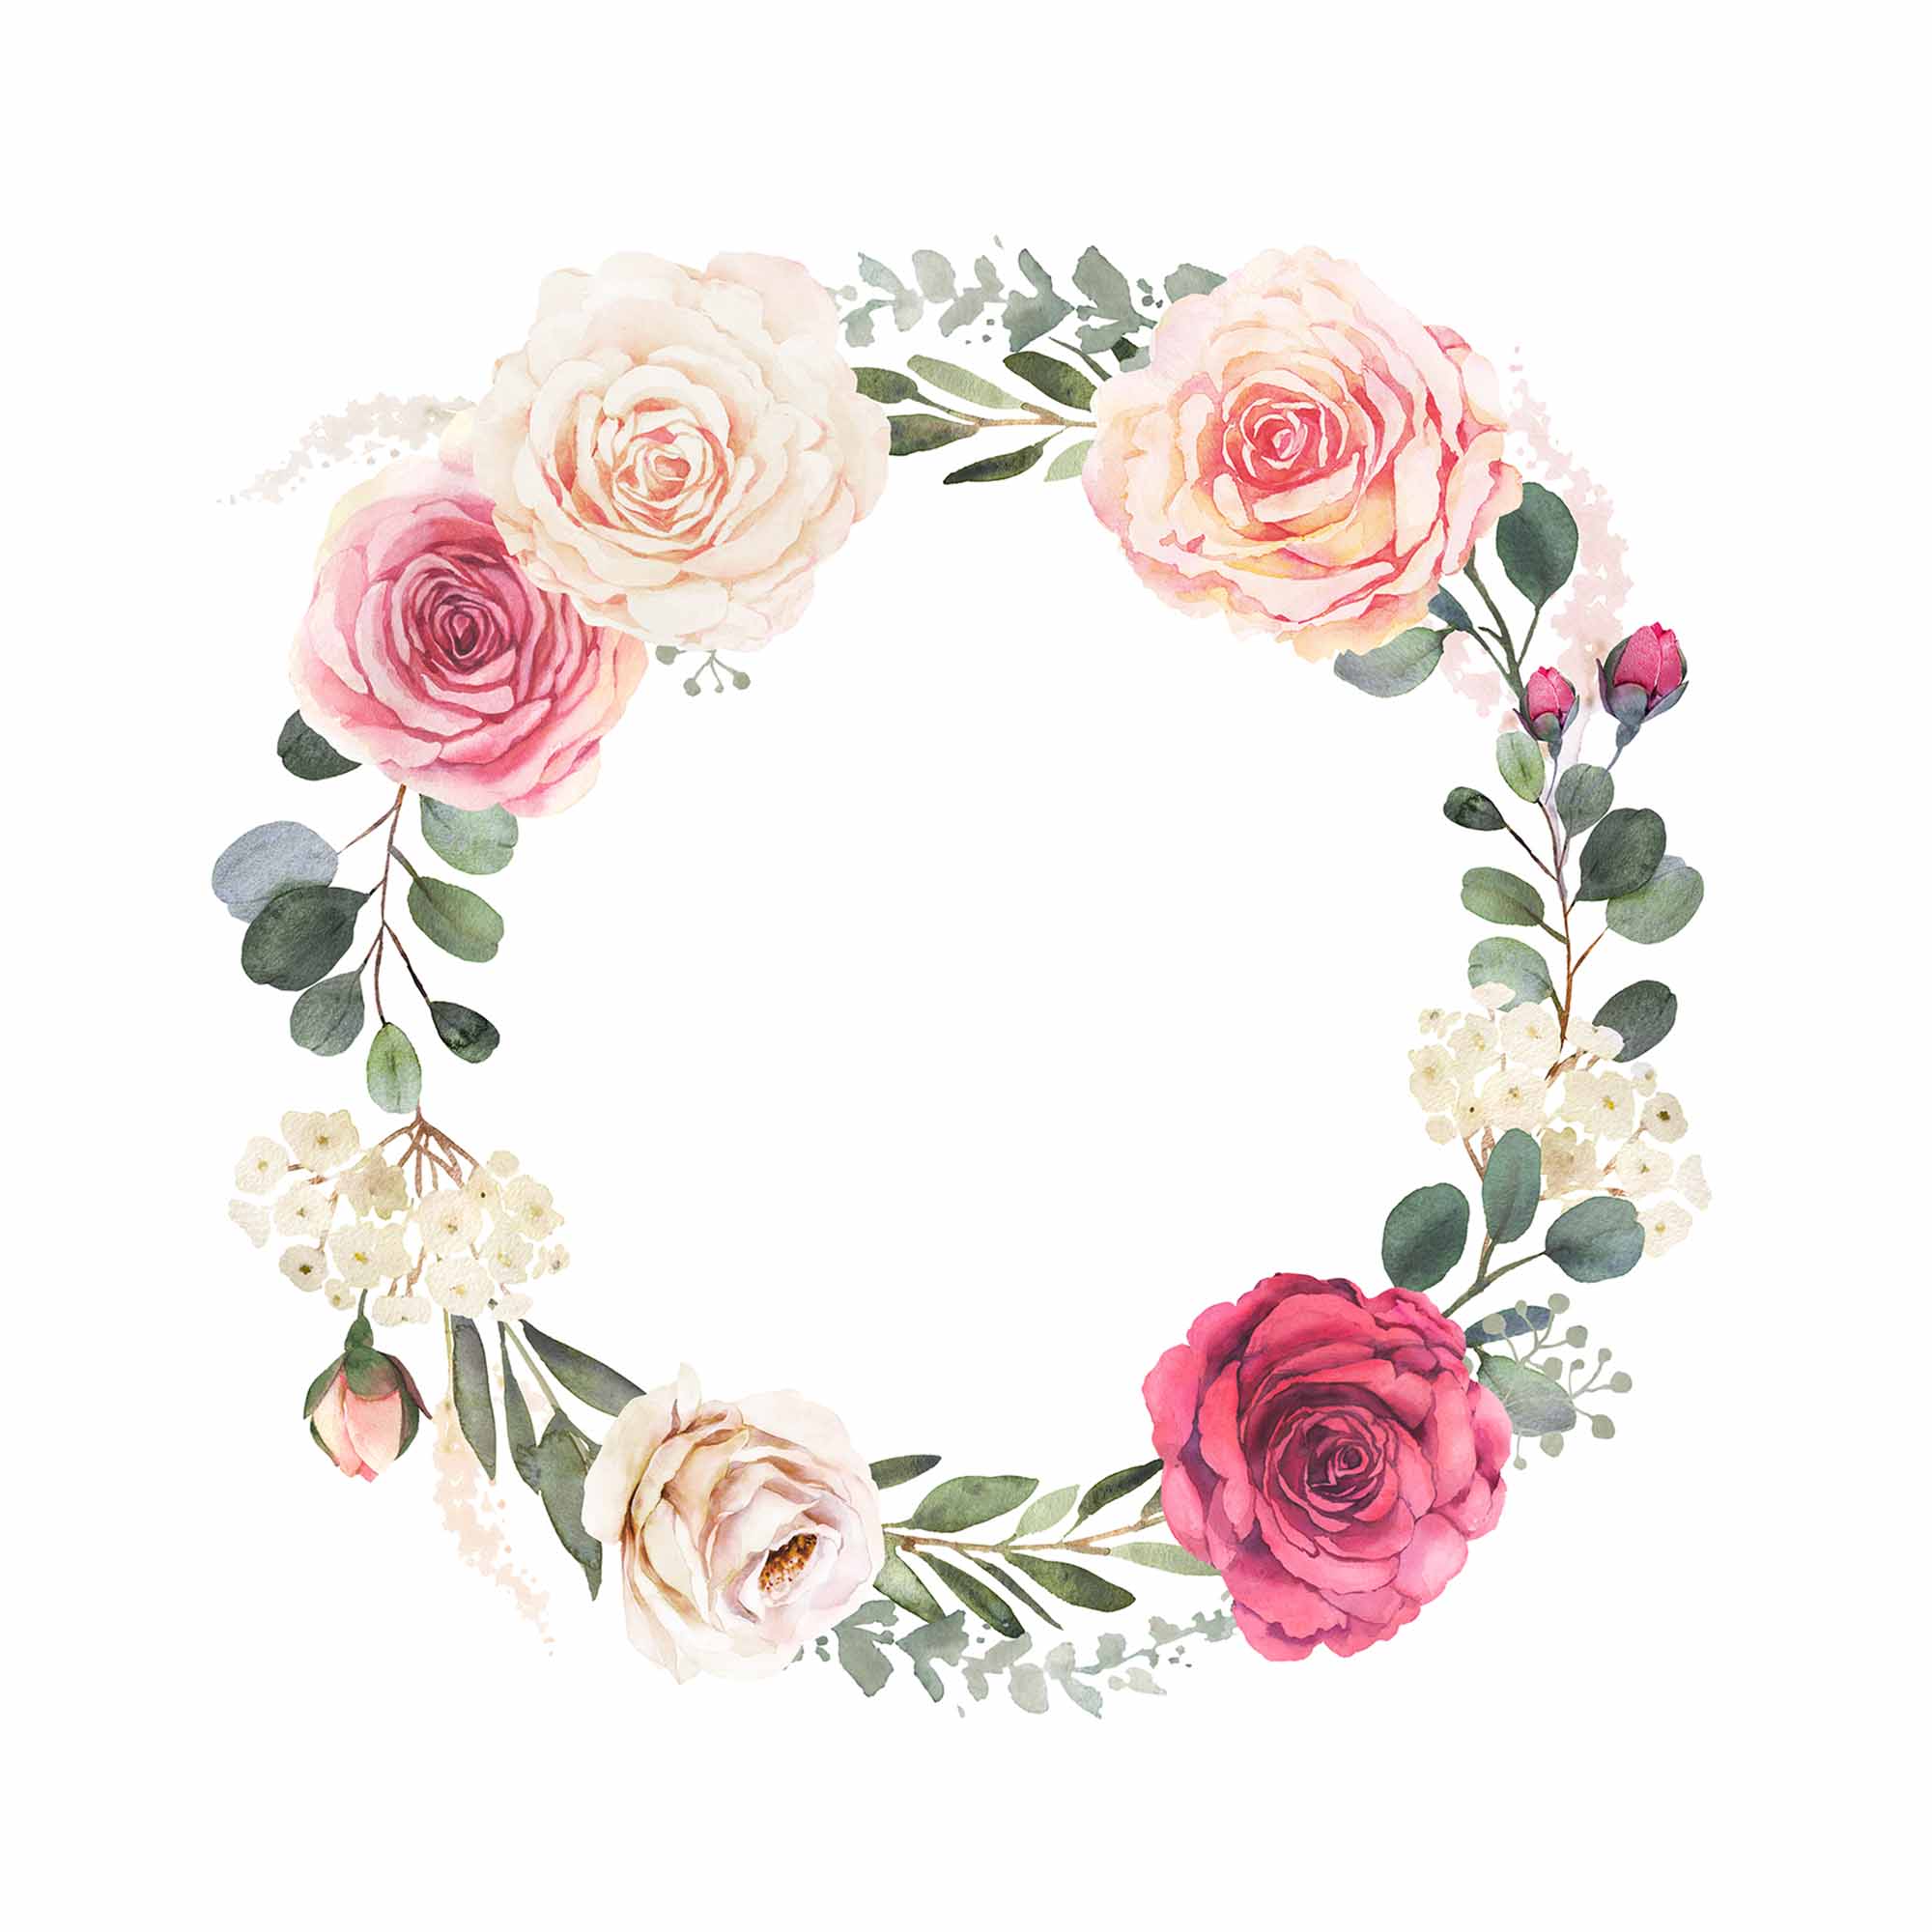 Watercolor Floral Wreath with Roses